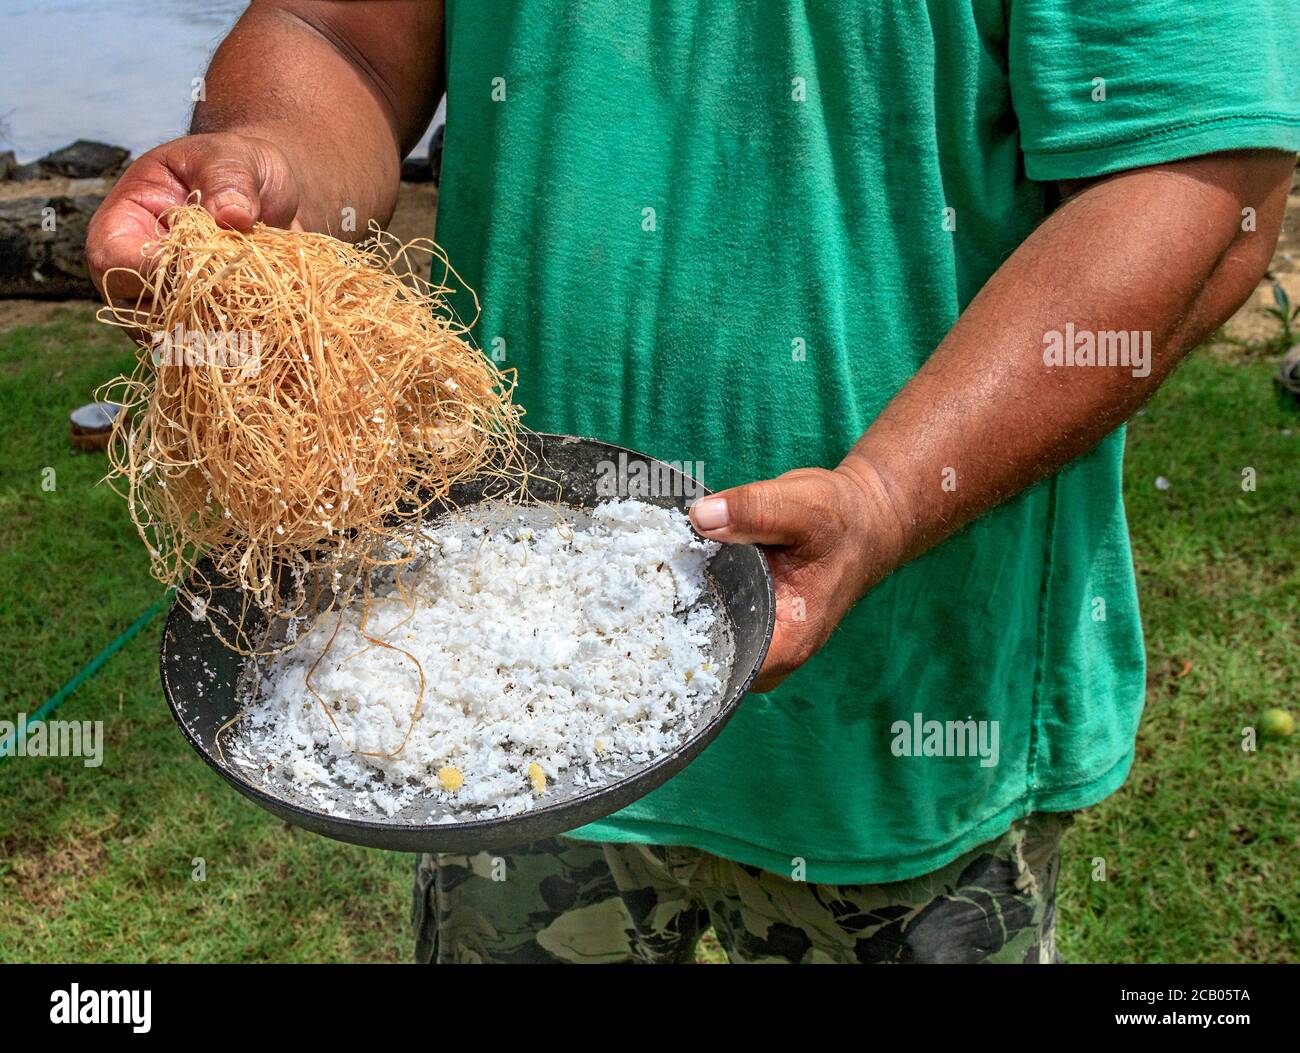 Local man demonstrates how to shred fresh coconut. The shreded coconut is then squeezed through hibiscus tree fibers and filtered to get coconut cream, which is used in cooking. Kosrae, Micronesia. Stock Photo